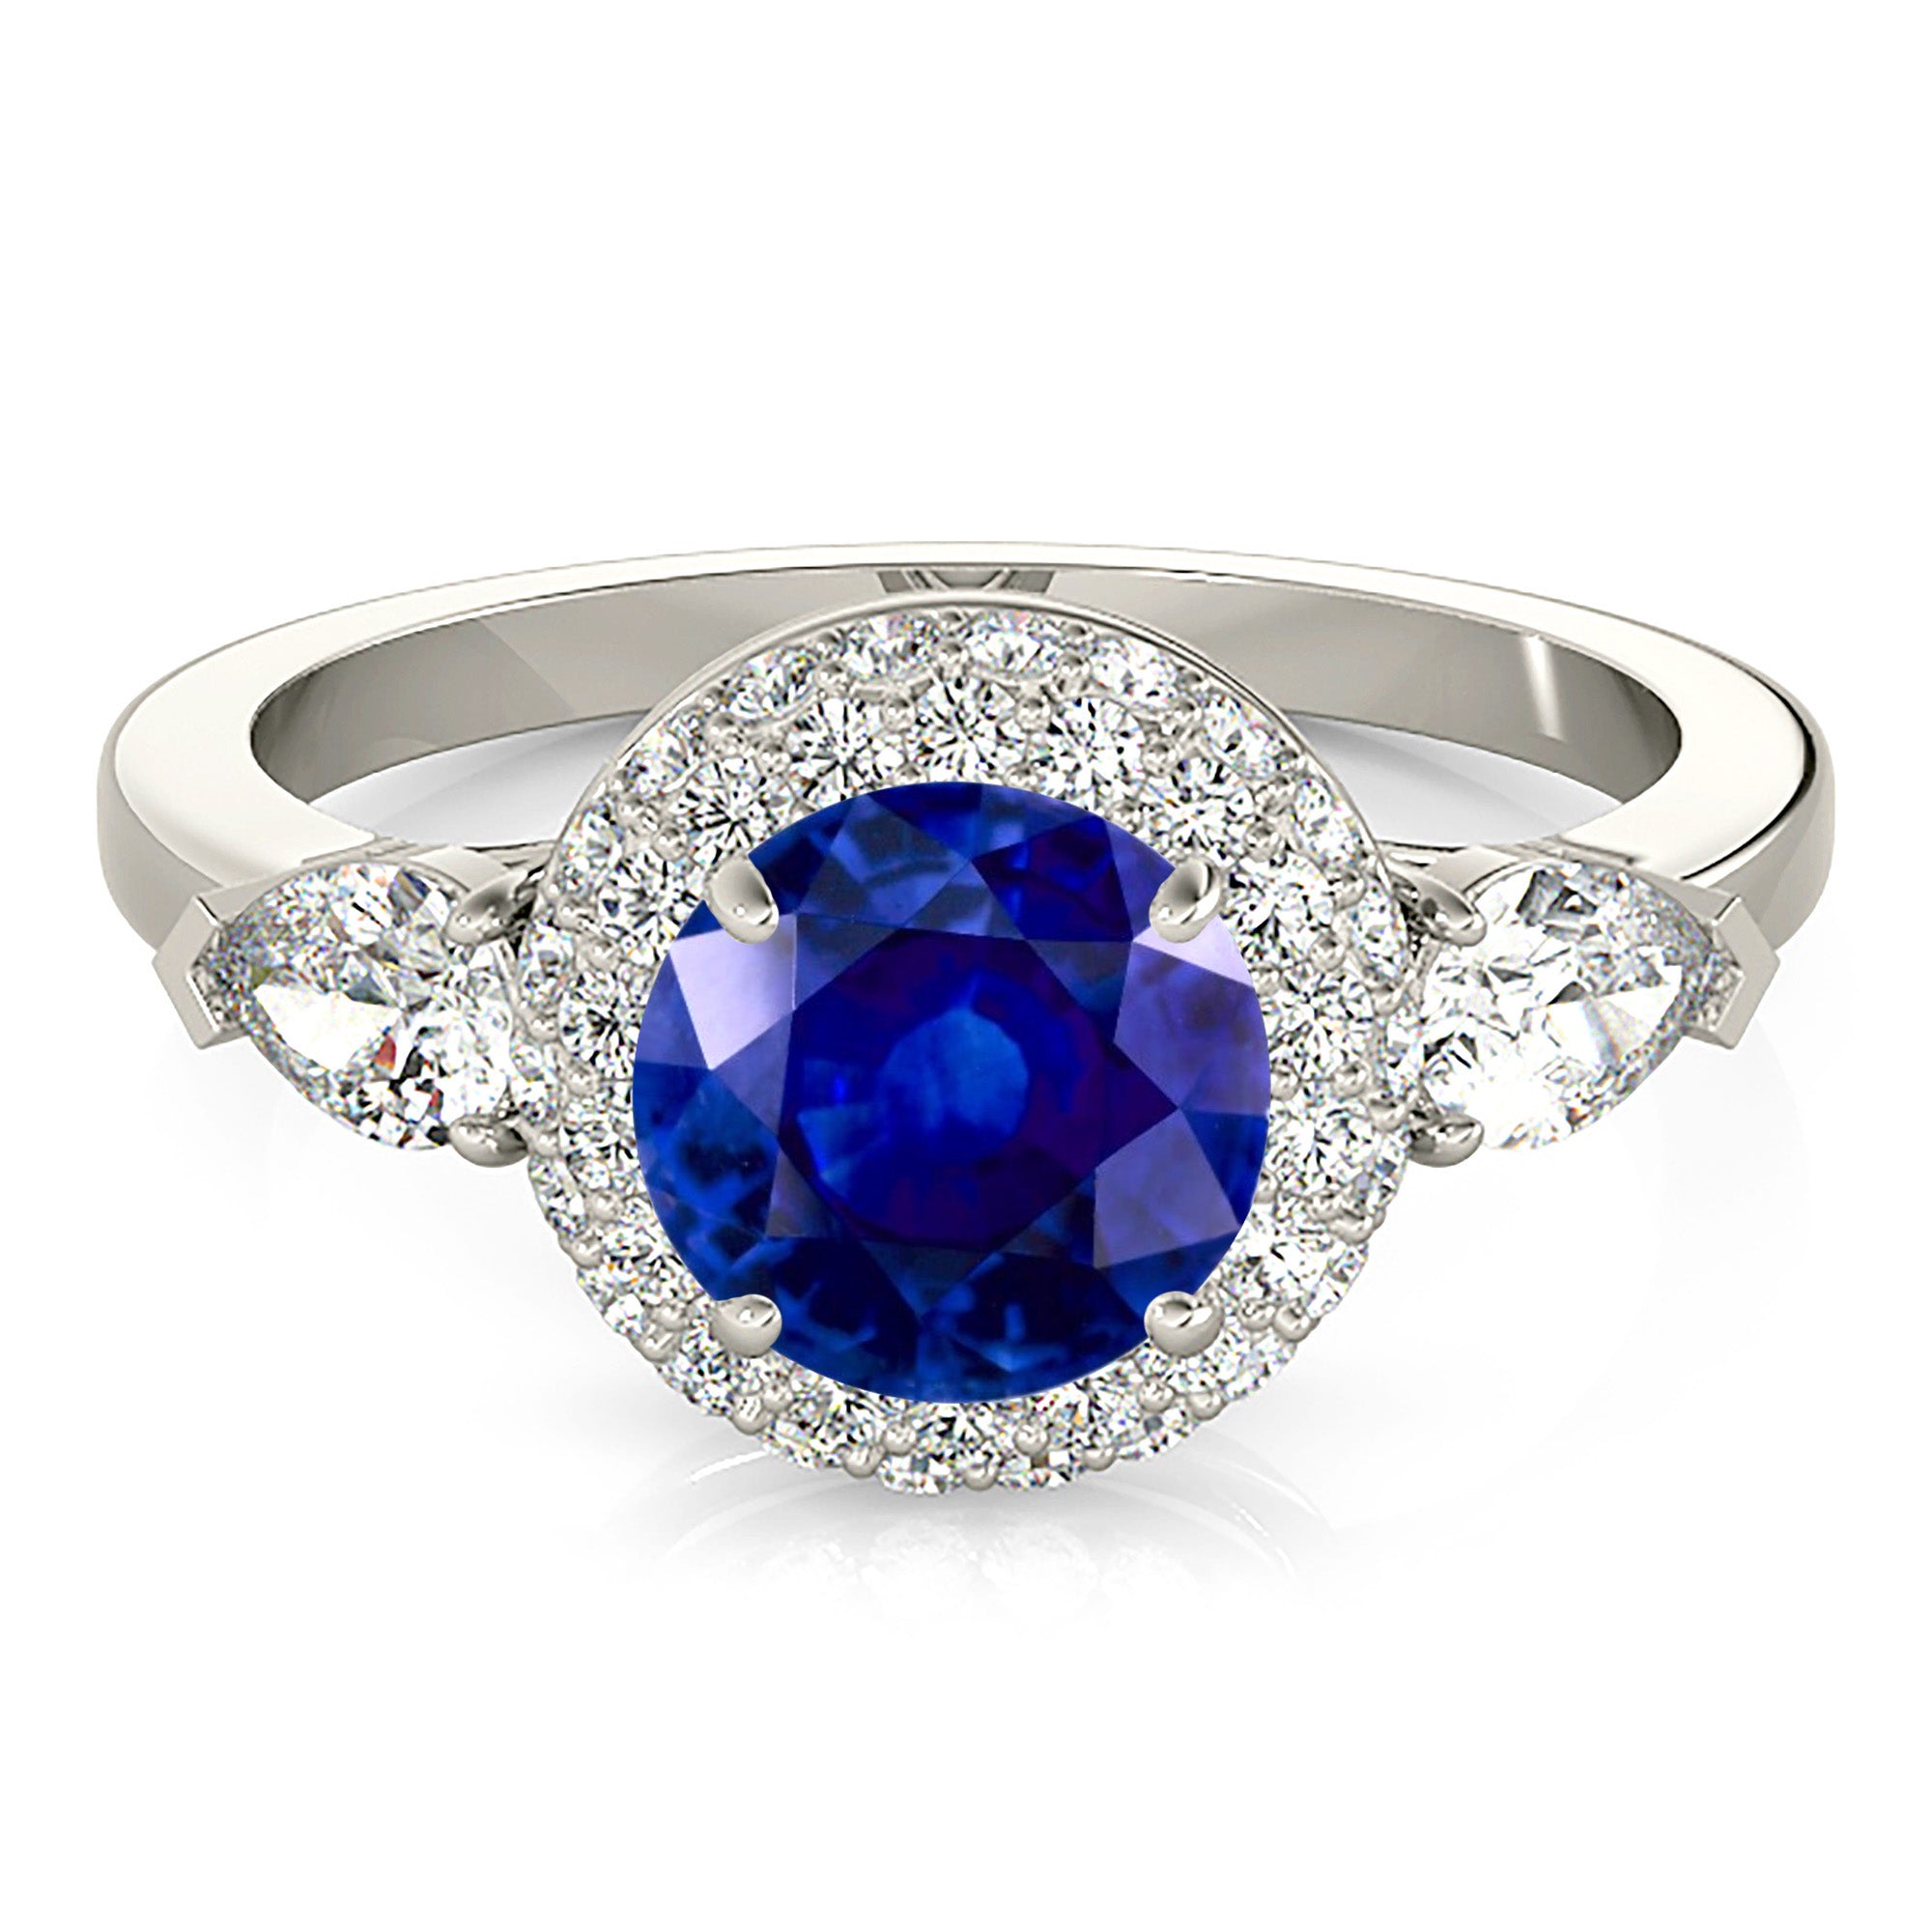 1.35 ct. Genuine Blue Sapphire Pave Set Halo Ring with 0.90 ctw. Round and Pear Shape Side Diamonds-in 14K/18K White, Yellow, Rose Gold and Platinum - Christmas Jewelry Gift -VIRABYANI